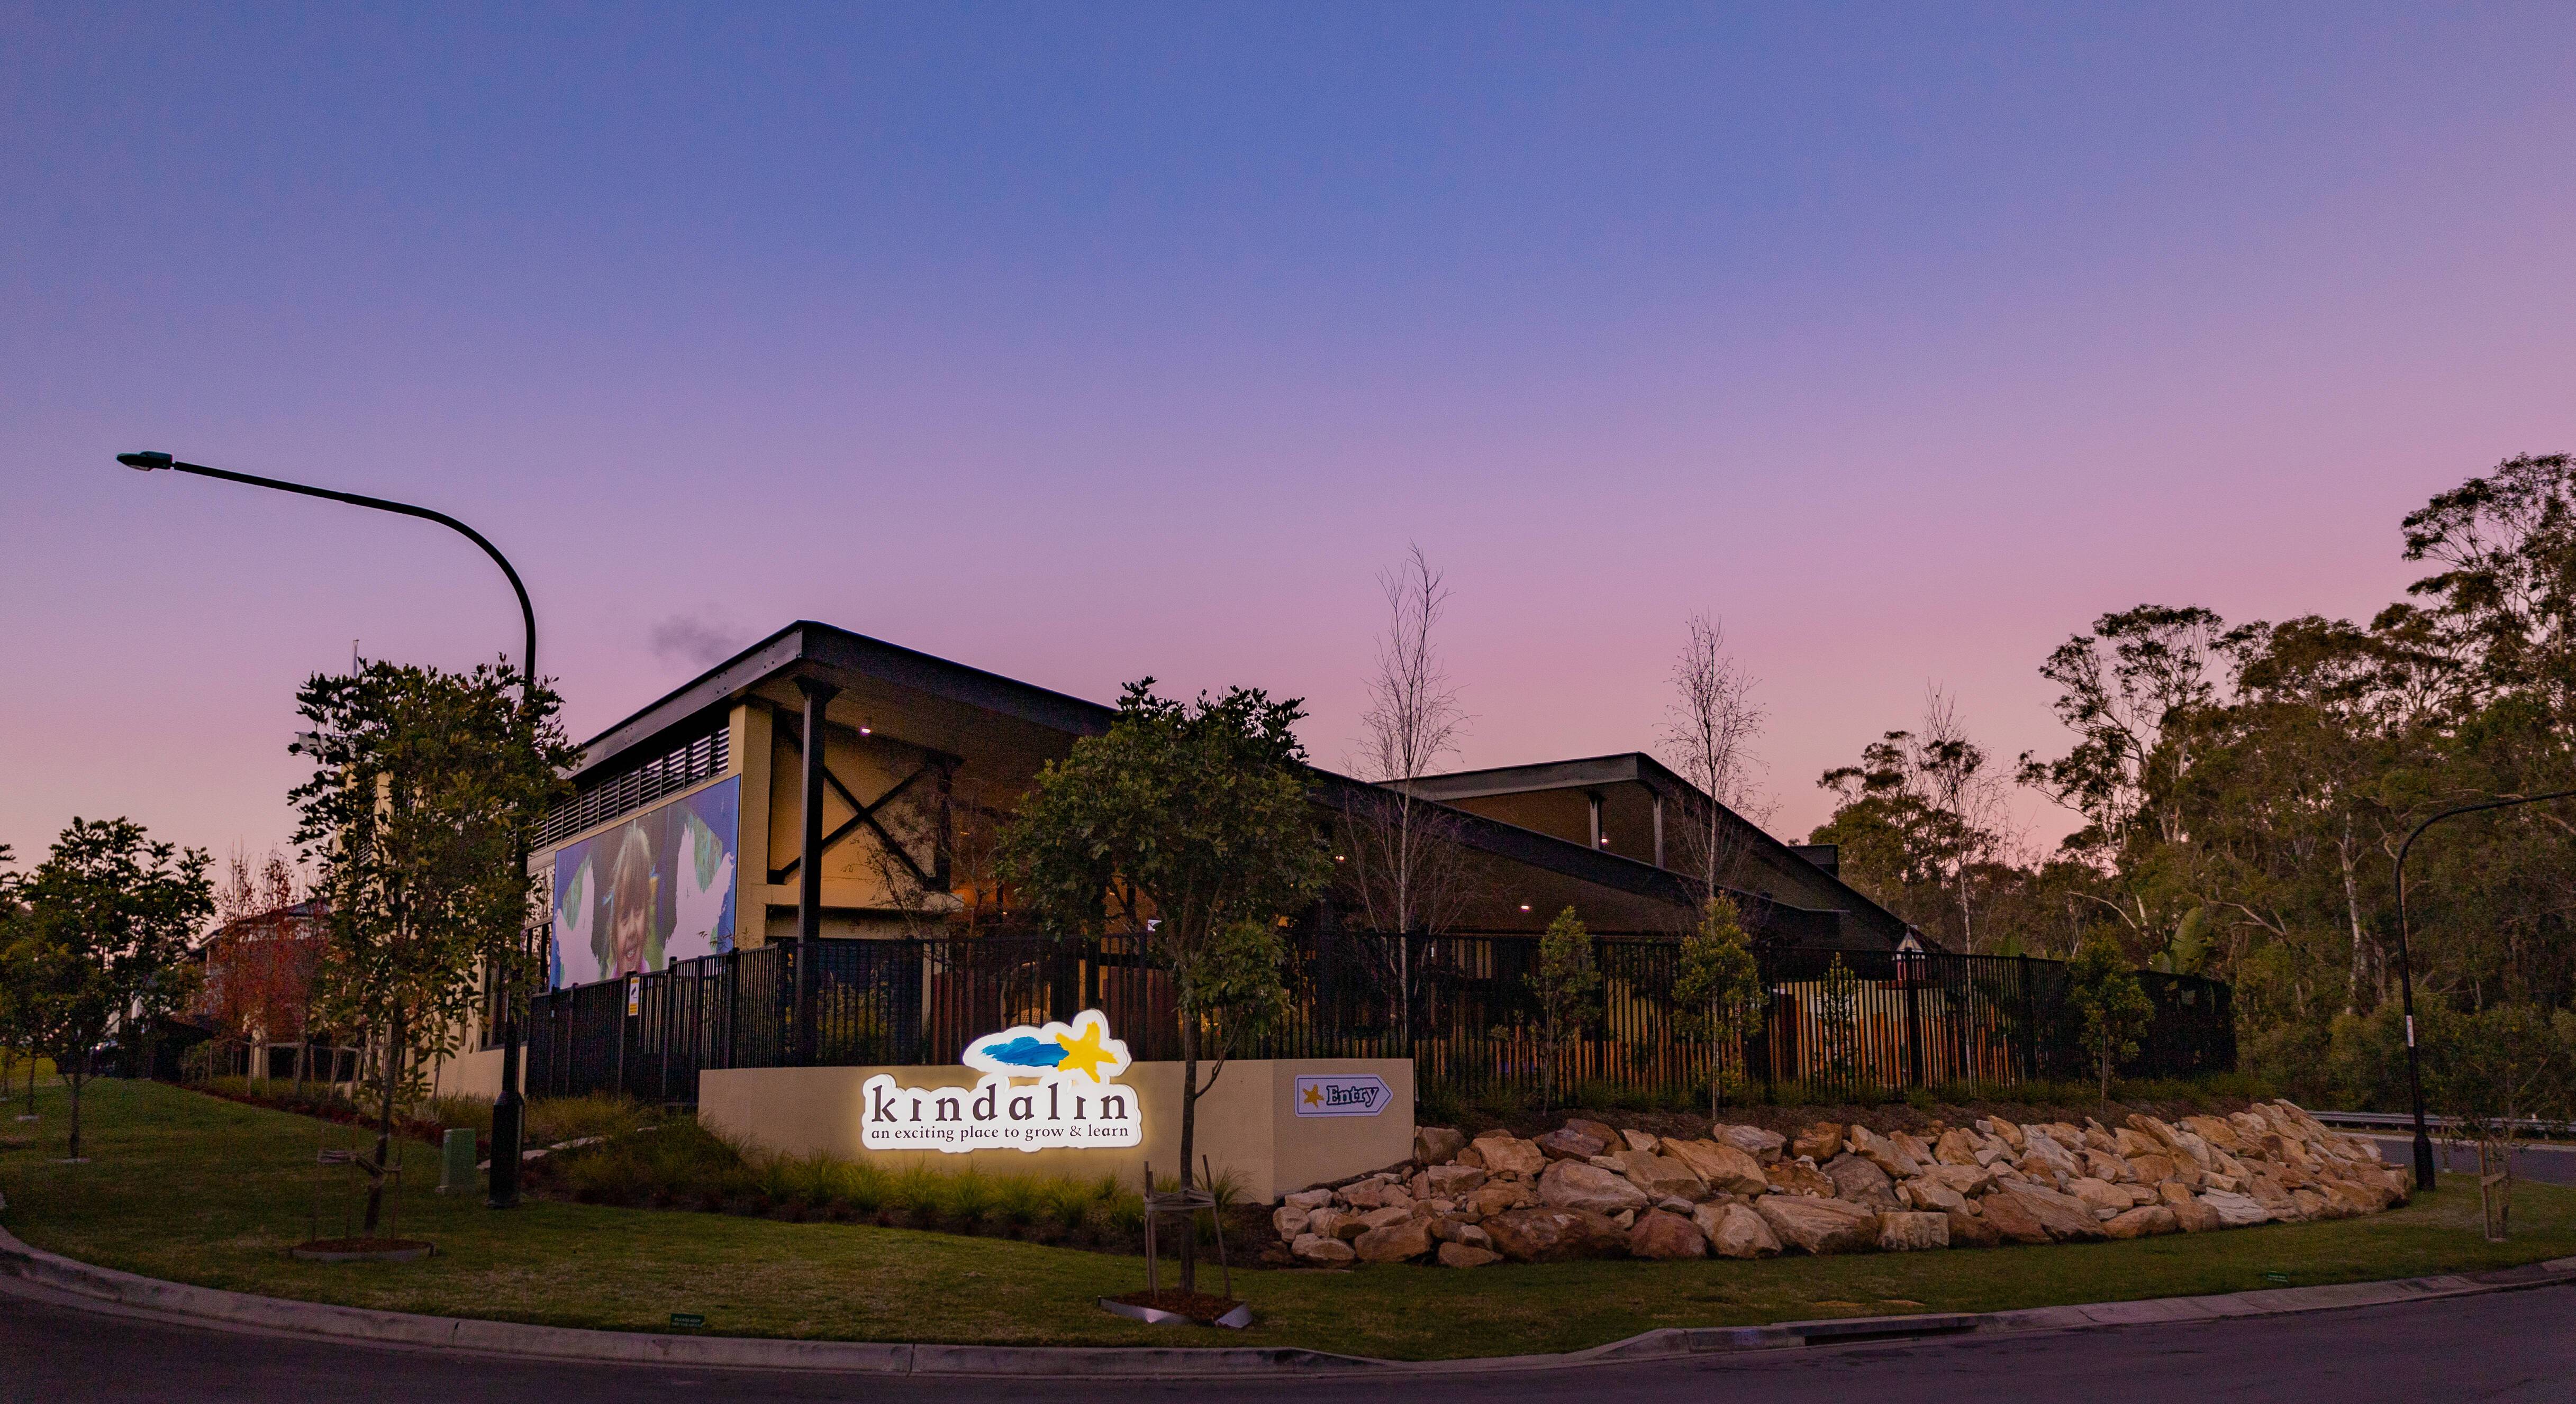 Kindalin Early Childhood Learning Centre - Rouse Hill